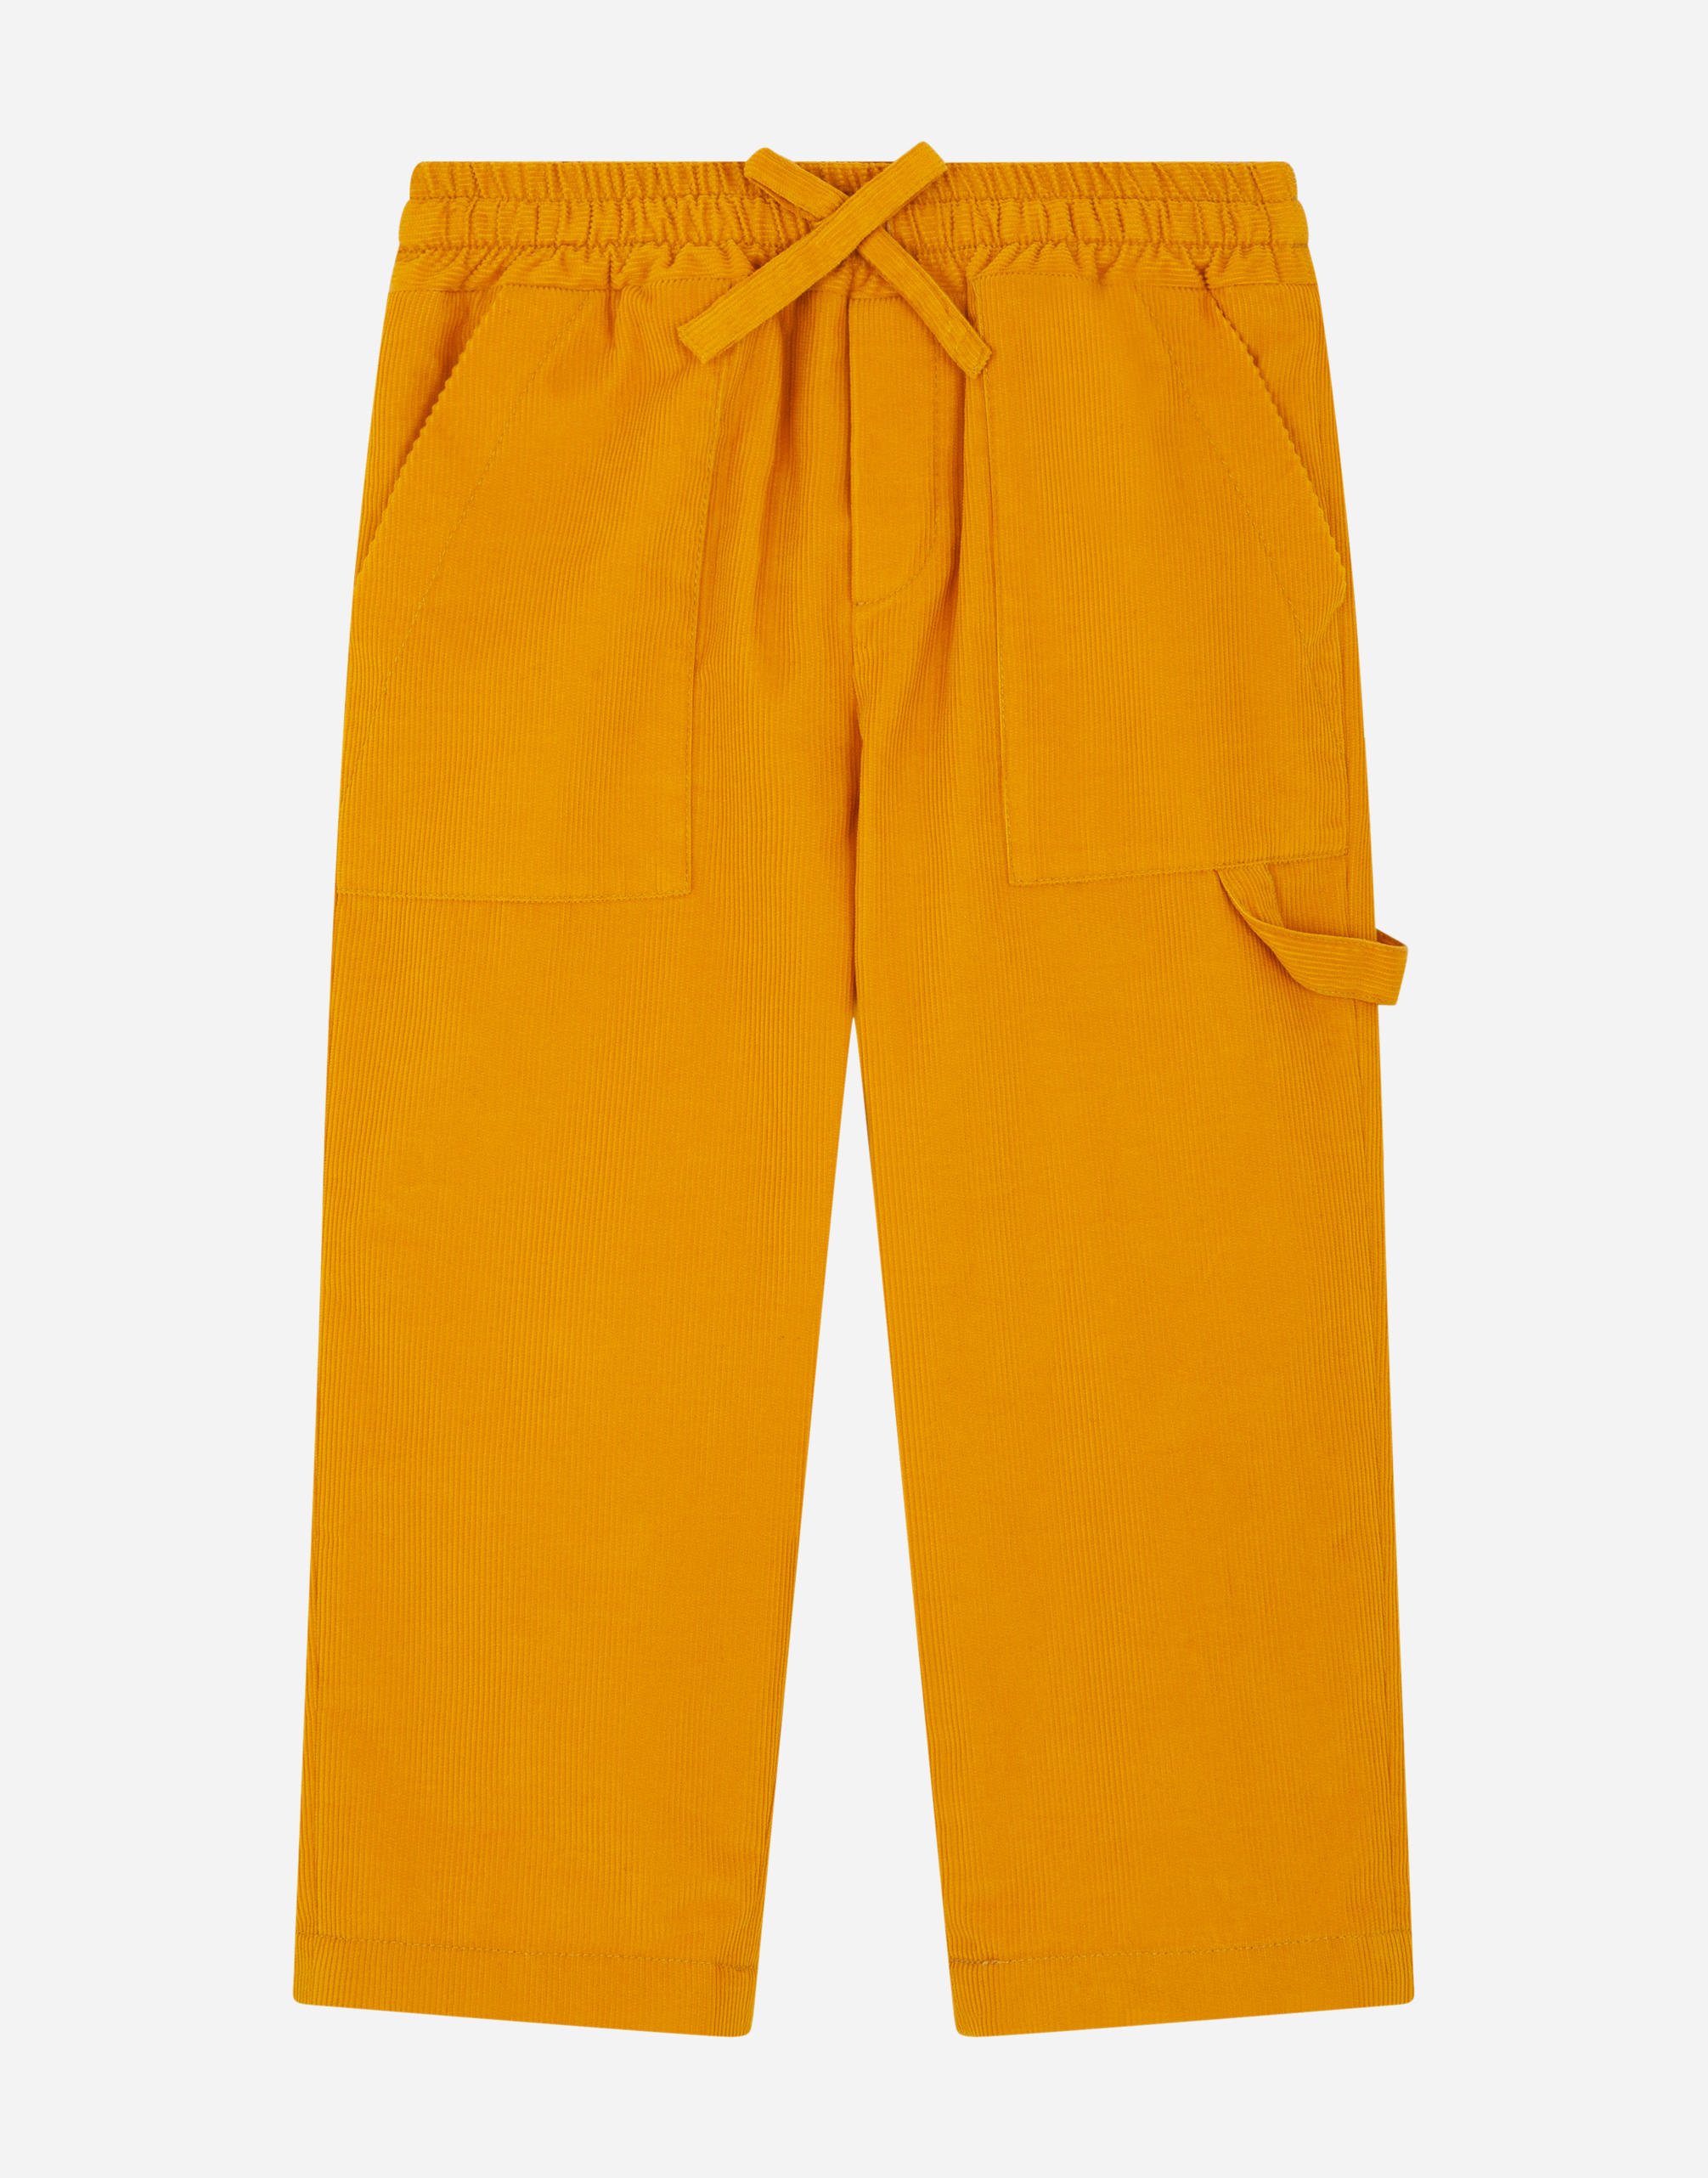 Stretch corduroy worker's pants in Yellow